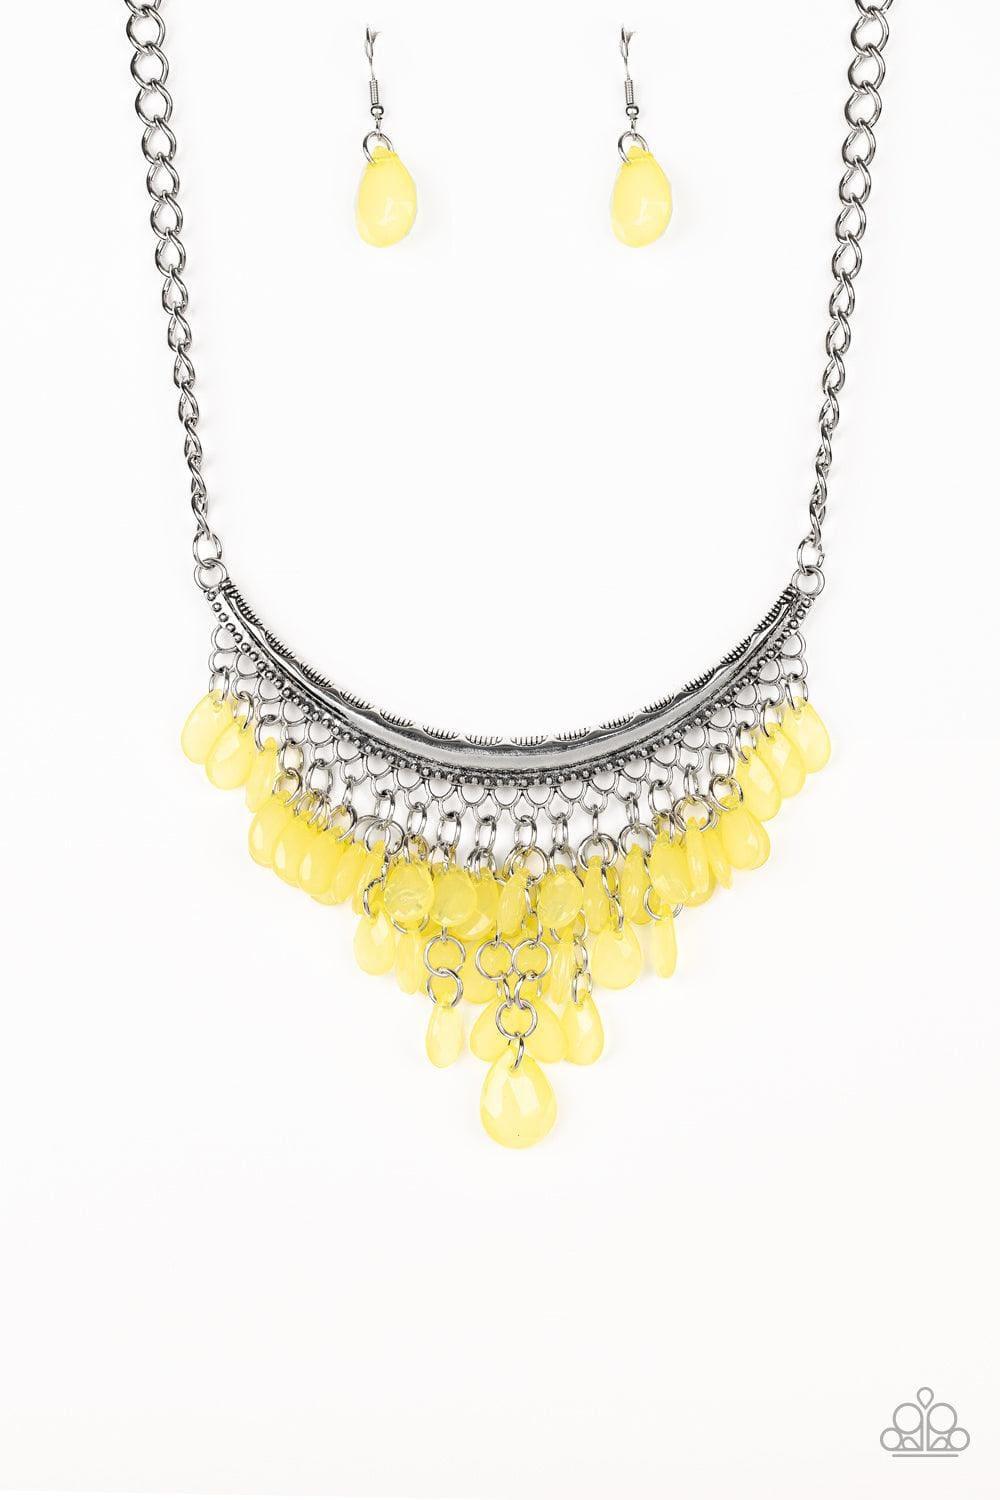 Paparazzi Accessories - Rio Rainfall - Yellow Necklace - Bling by JessieK